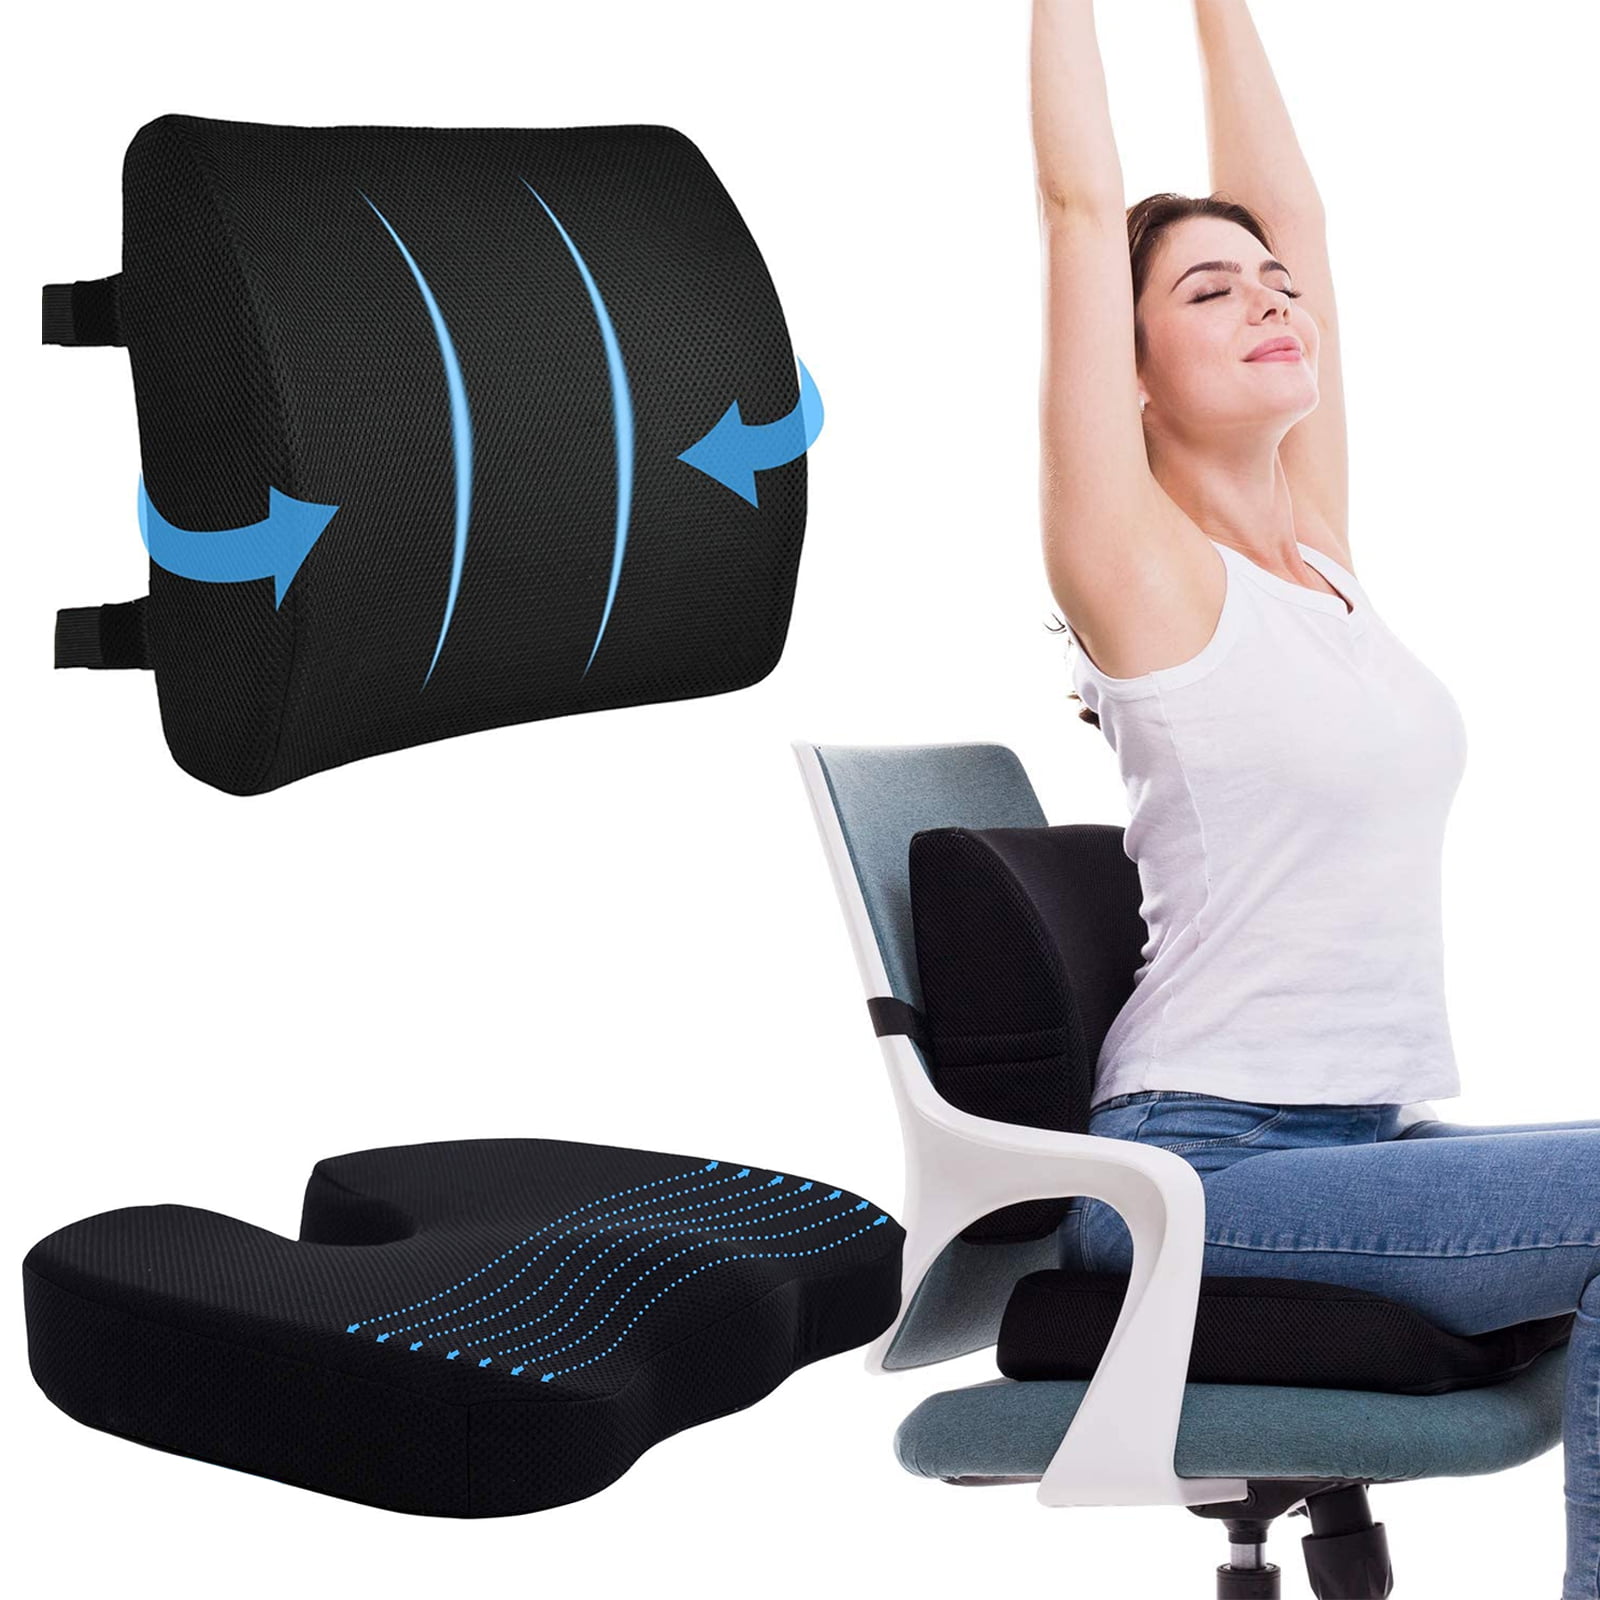  FORTEM Chair Cushion, Seat Cushion for Office Chair